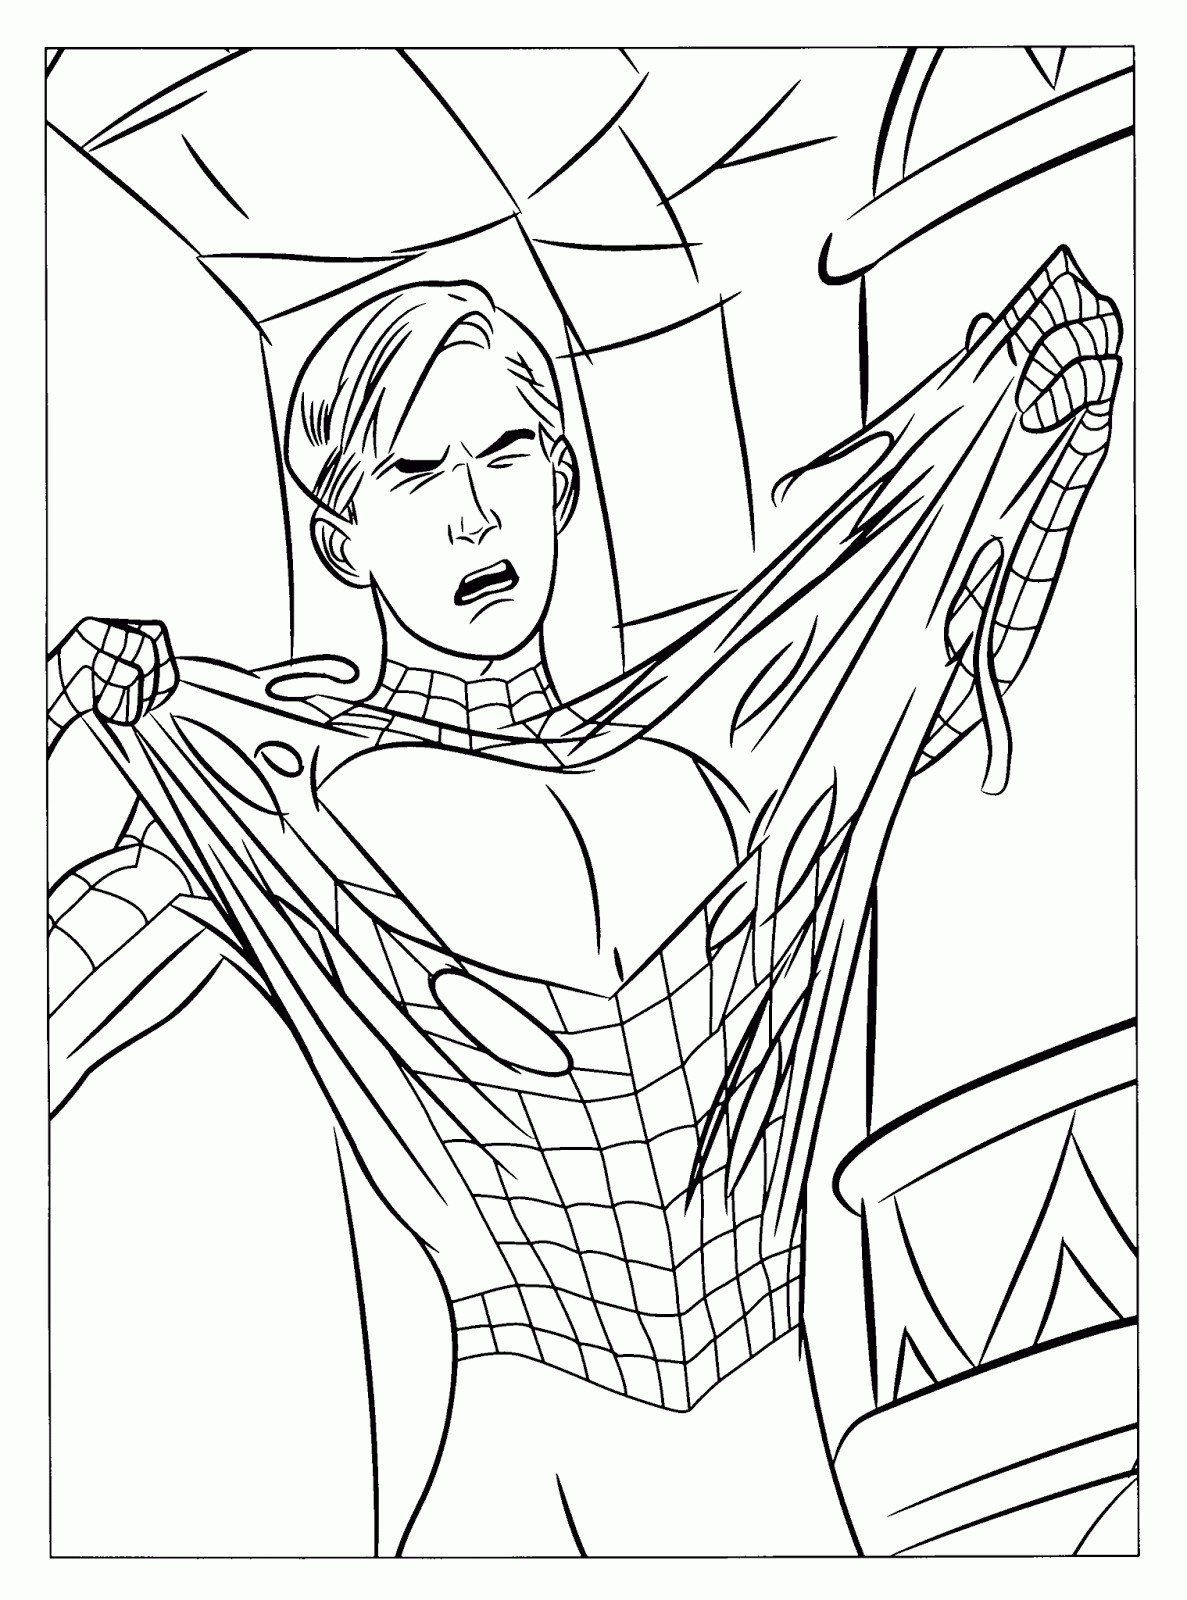 spiderman color sheets the amazing spider man coloring pages spiderman color color sheets spiderman 